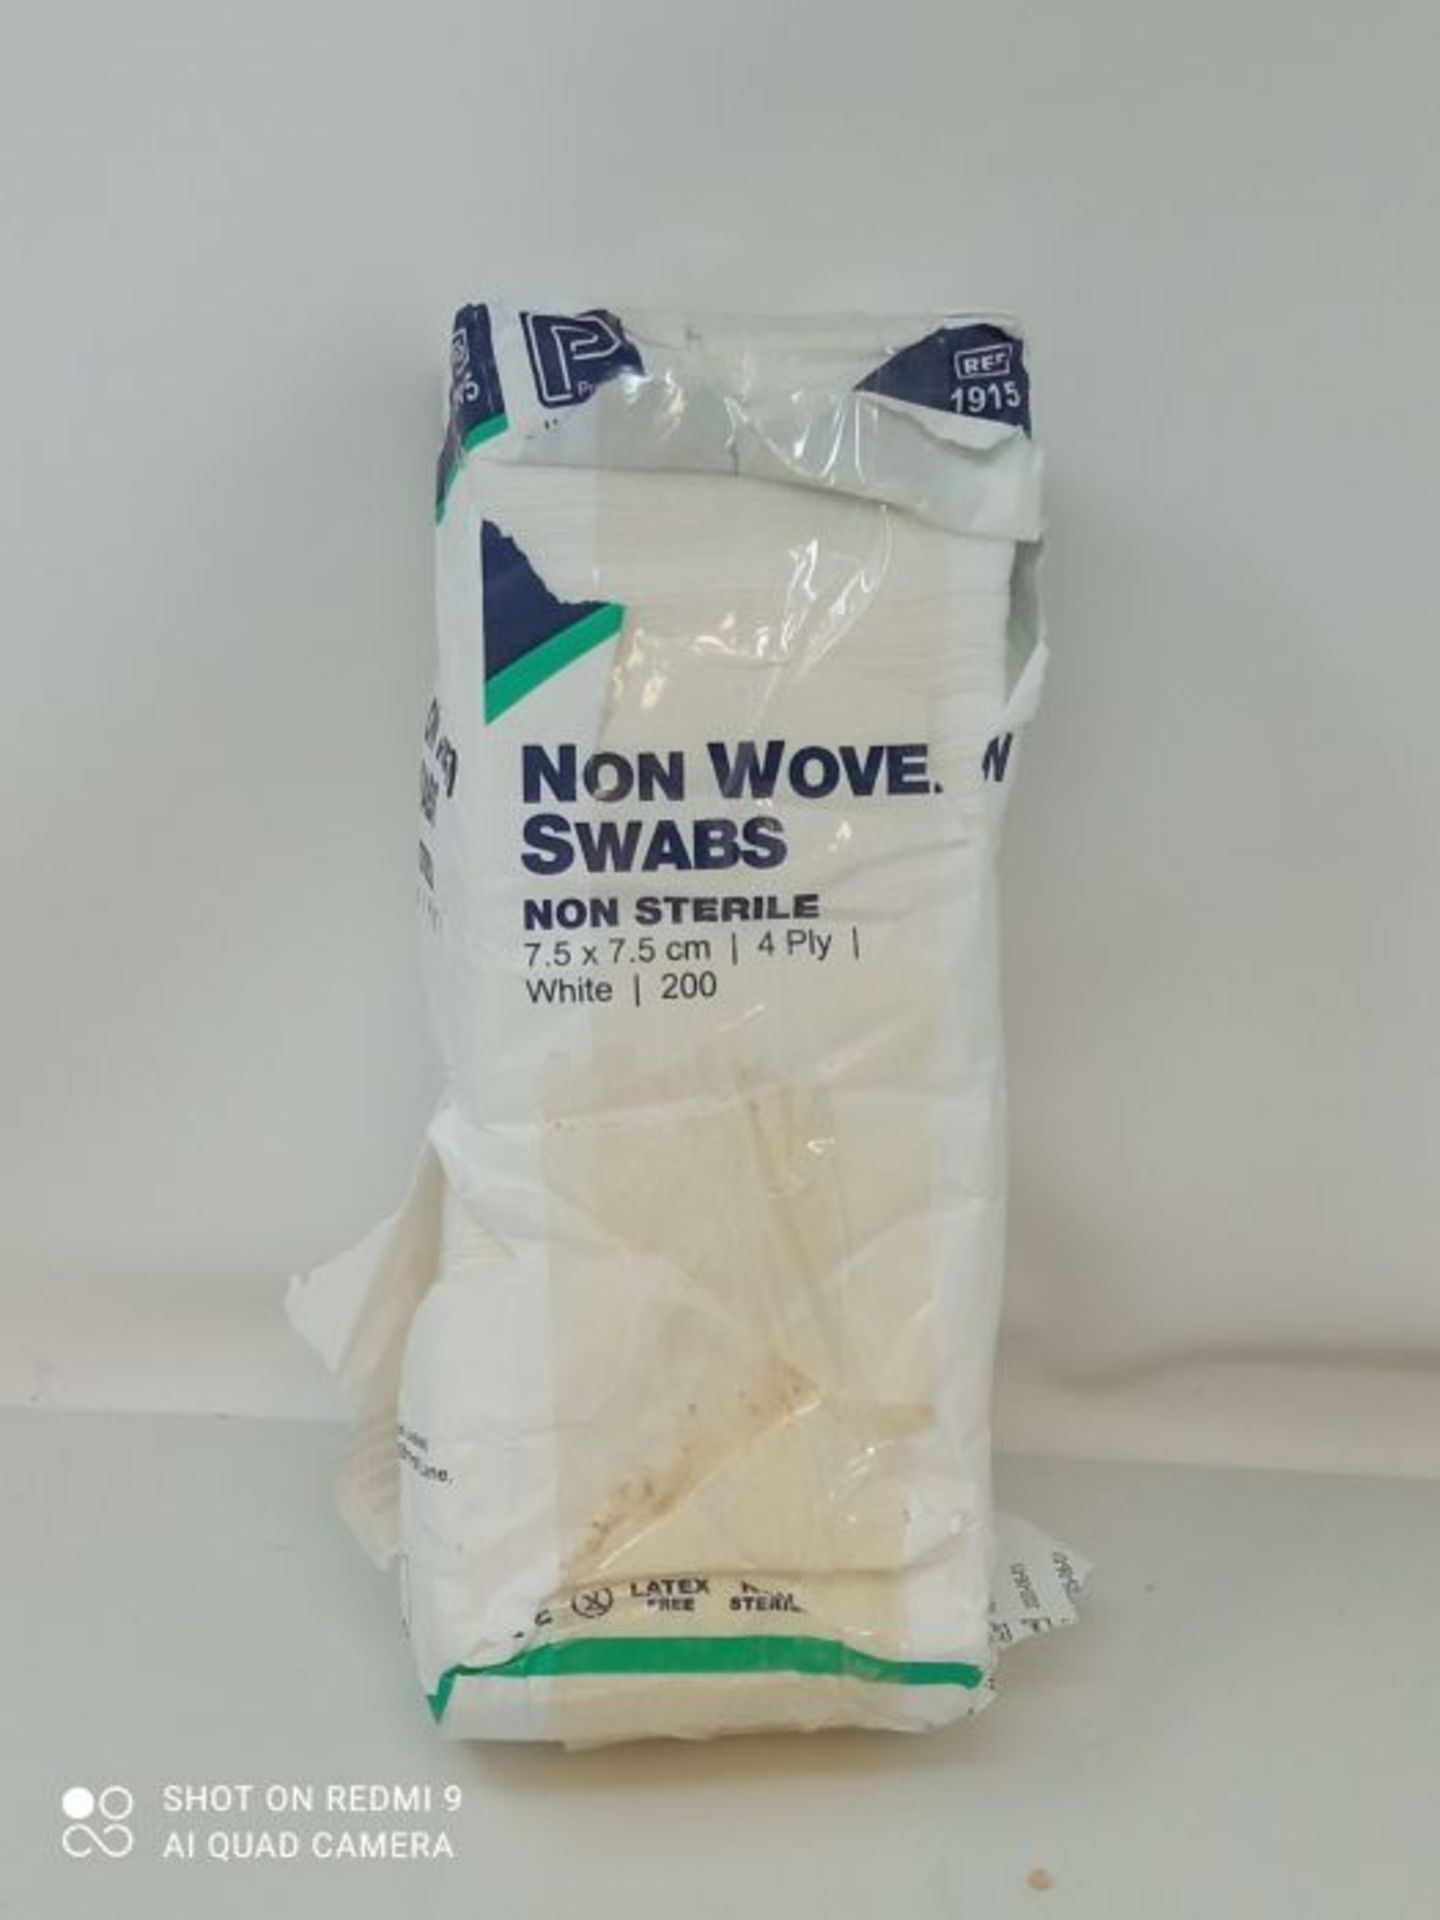 Premier 1915 Non-Sterile Non-Woven Swabs 4 Ply 7.5 cm x 7.5 cm White Paper Packs (Pack - Image 2 of 2